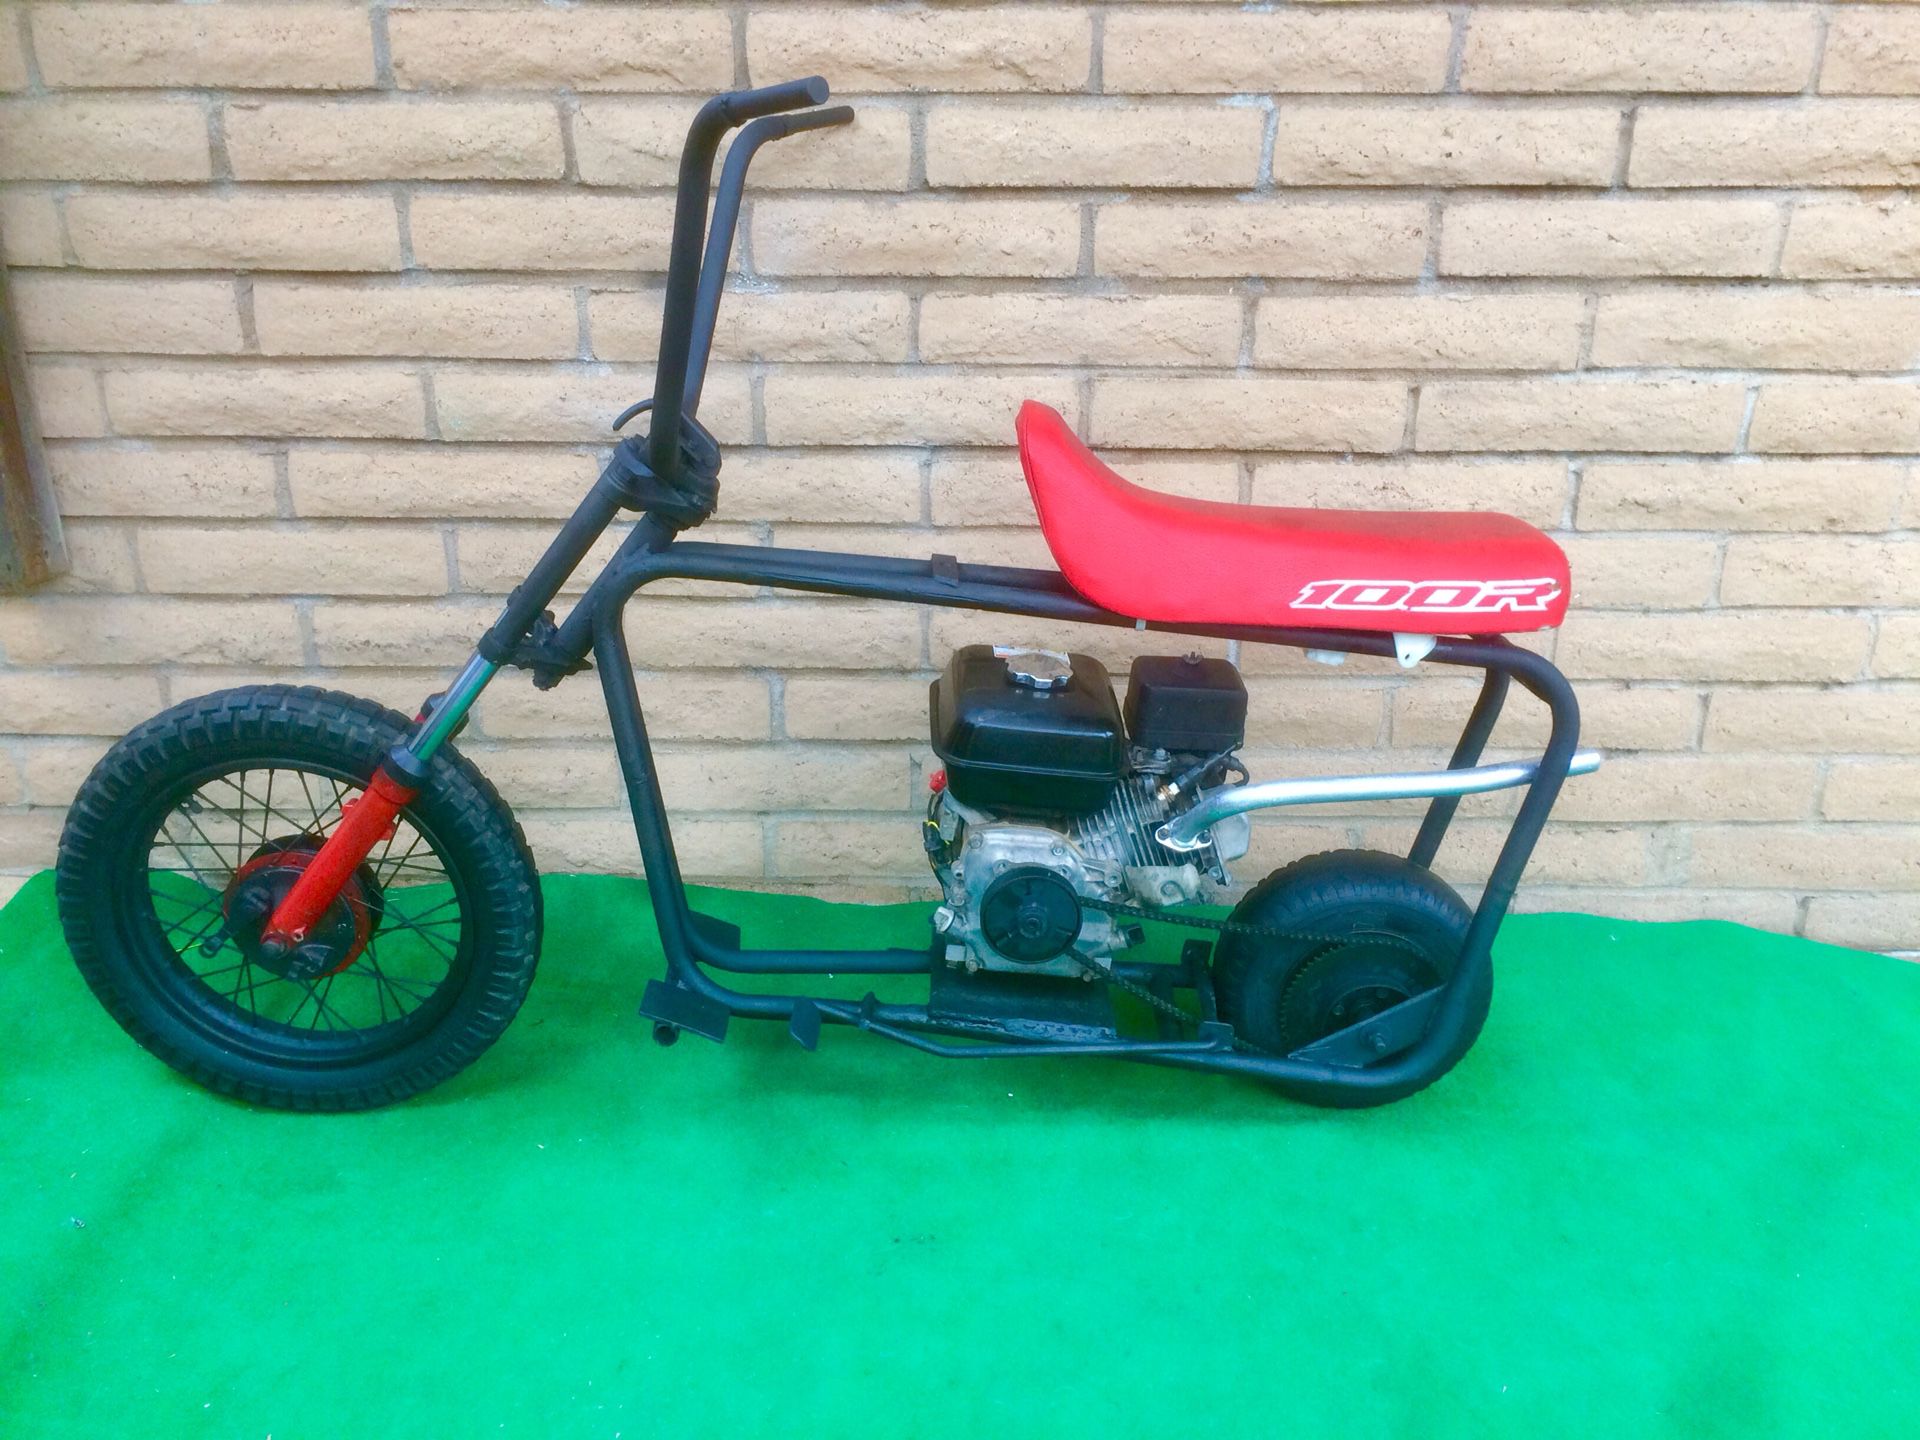 Honda bike 6.5 hp Scooter small lowrider chopper little motorcycle kid for Sale in San Diego, CA - OfferUp